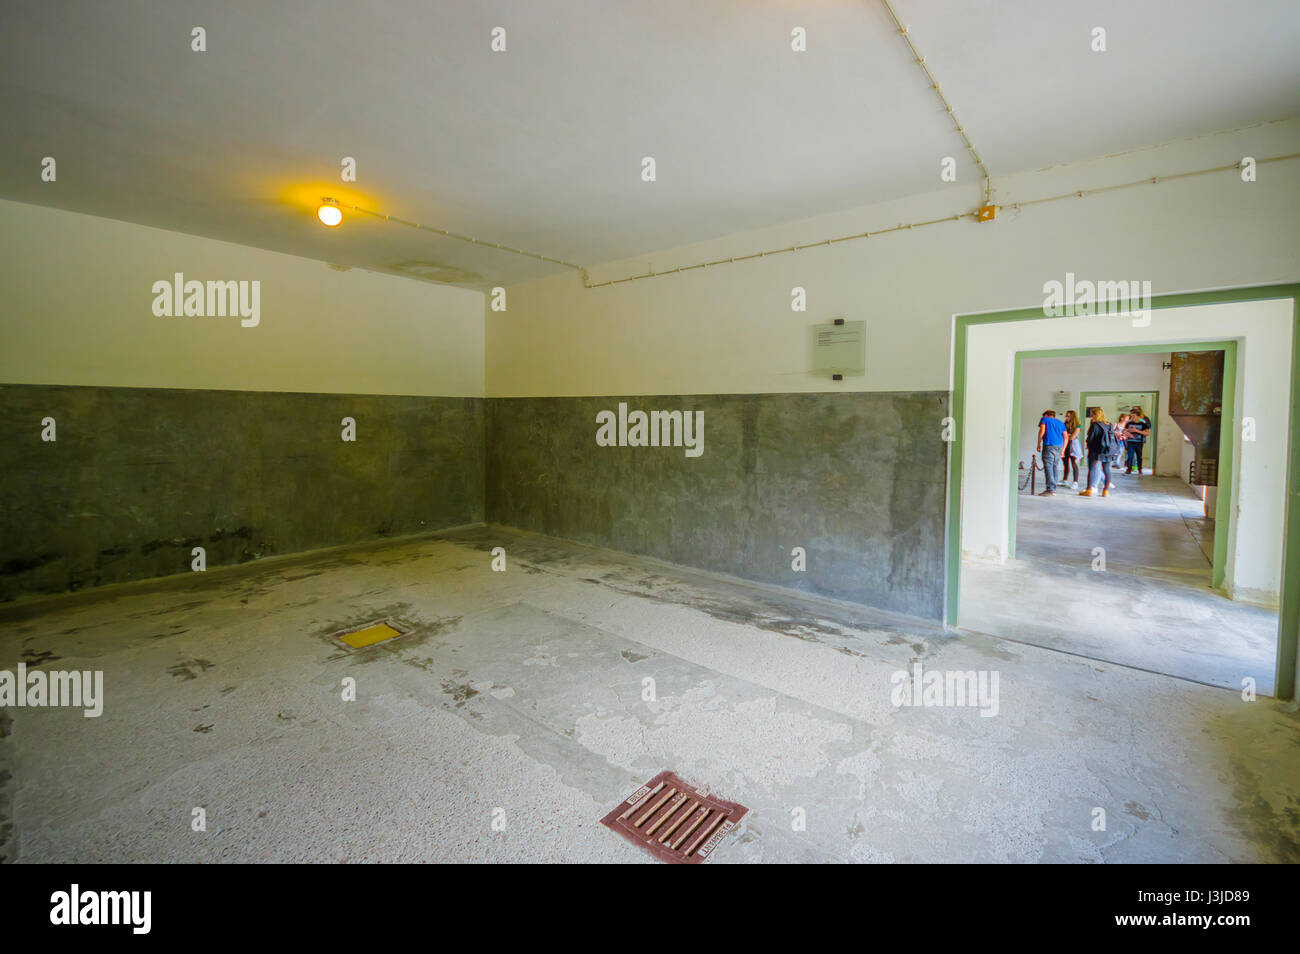 Dachau, Germany - July 30, 2015: Gas chamber at concentration camp as seen from inside view. Stock Photo